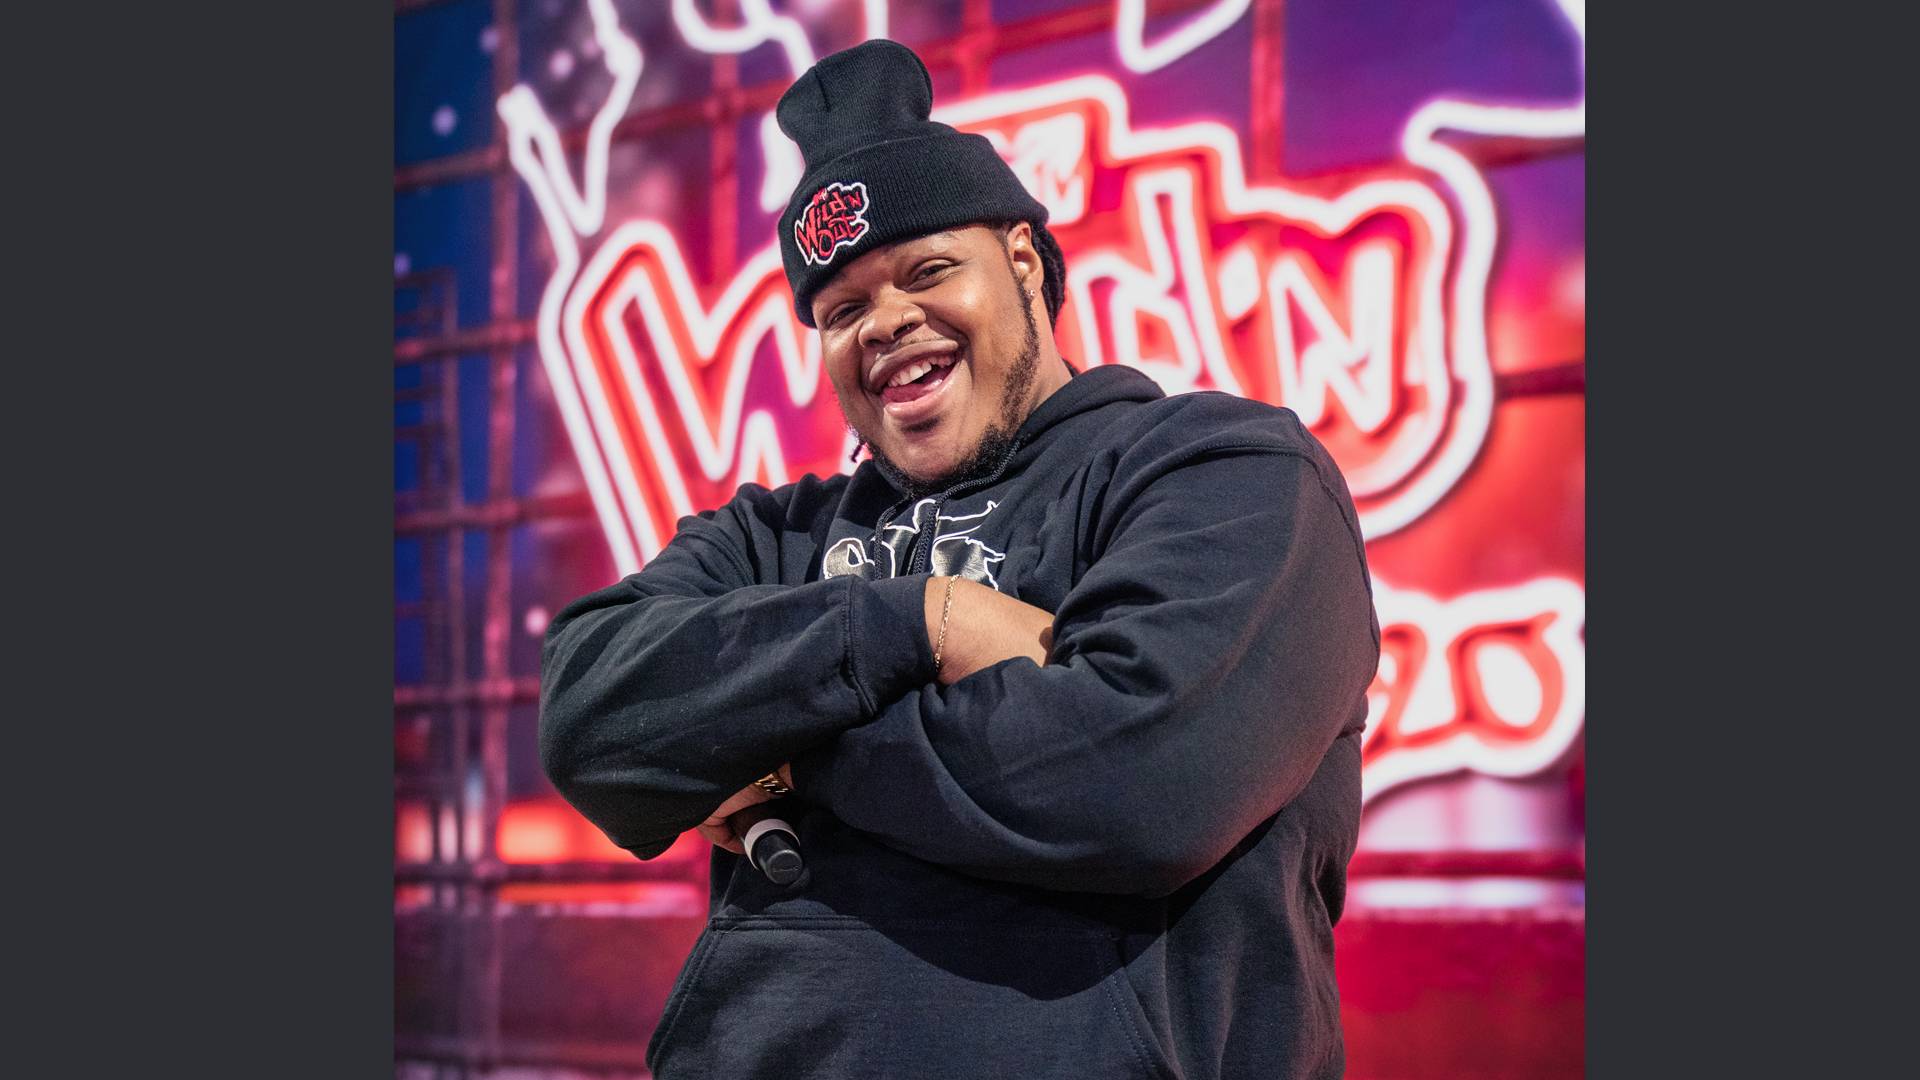 wild 'n out tour schedule